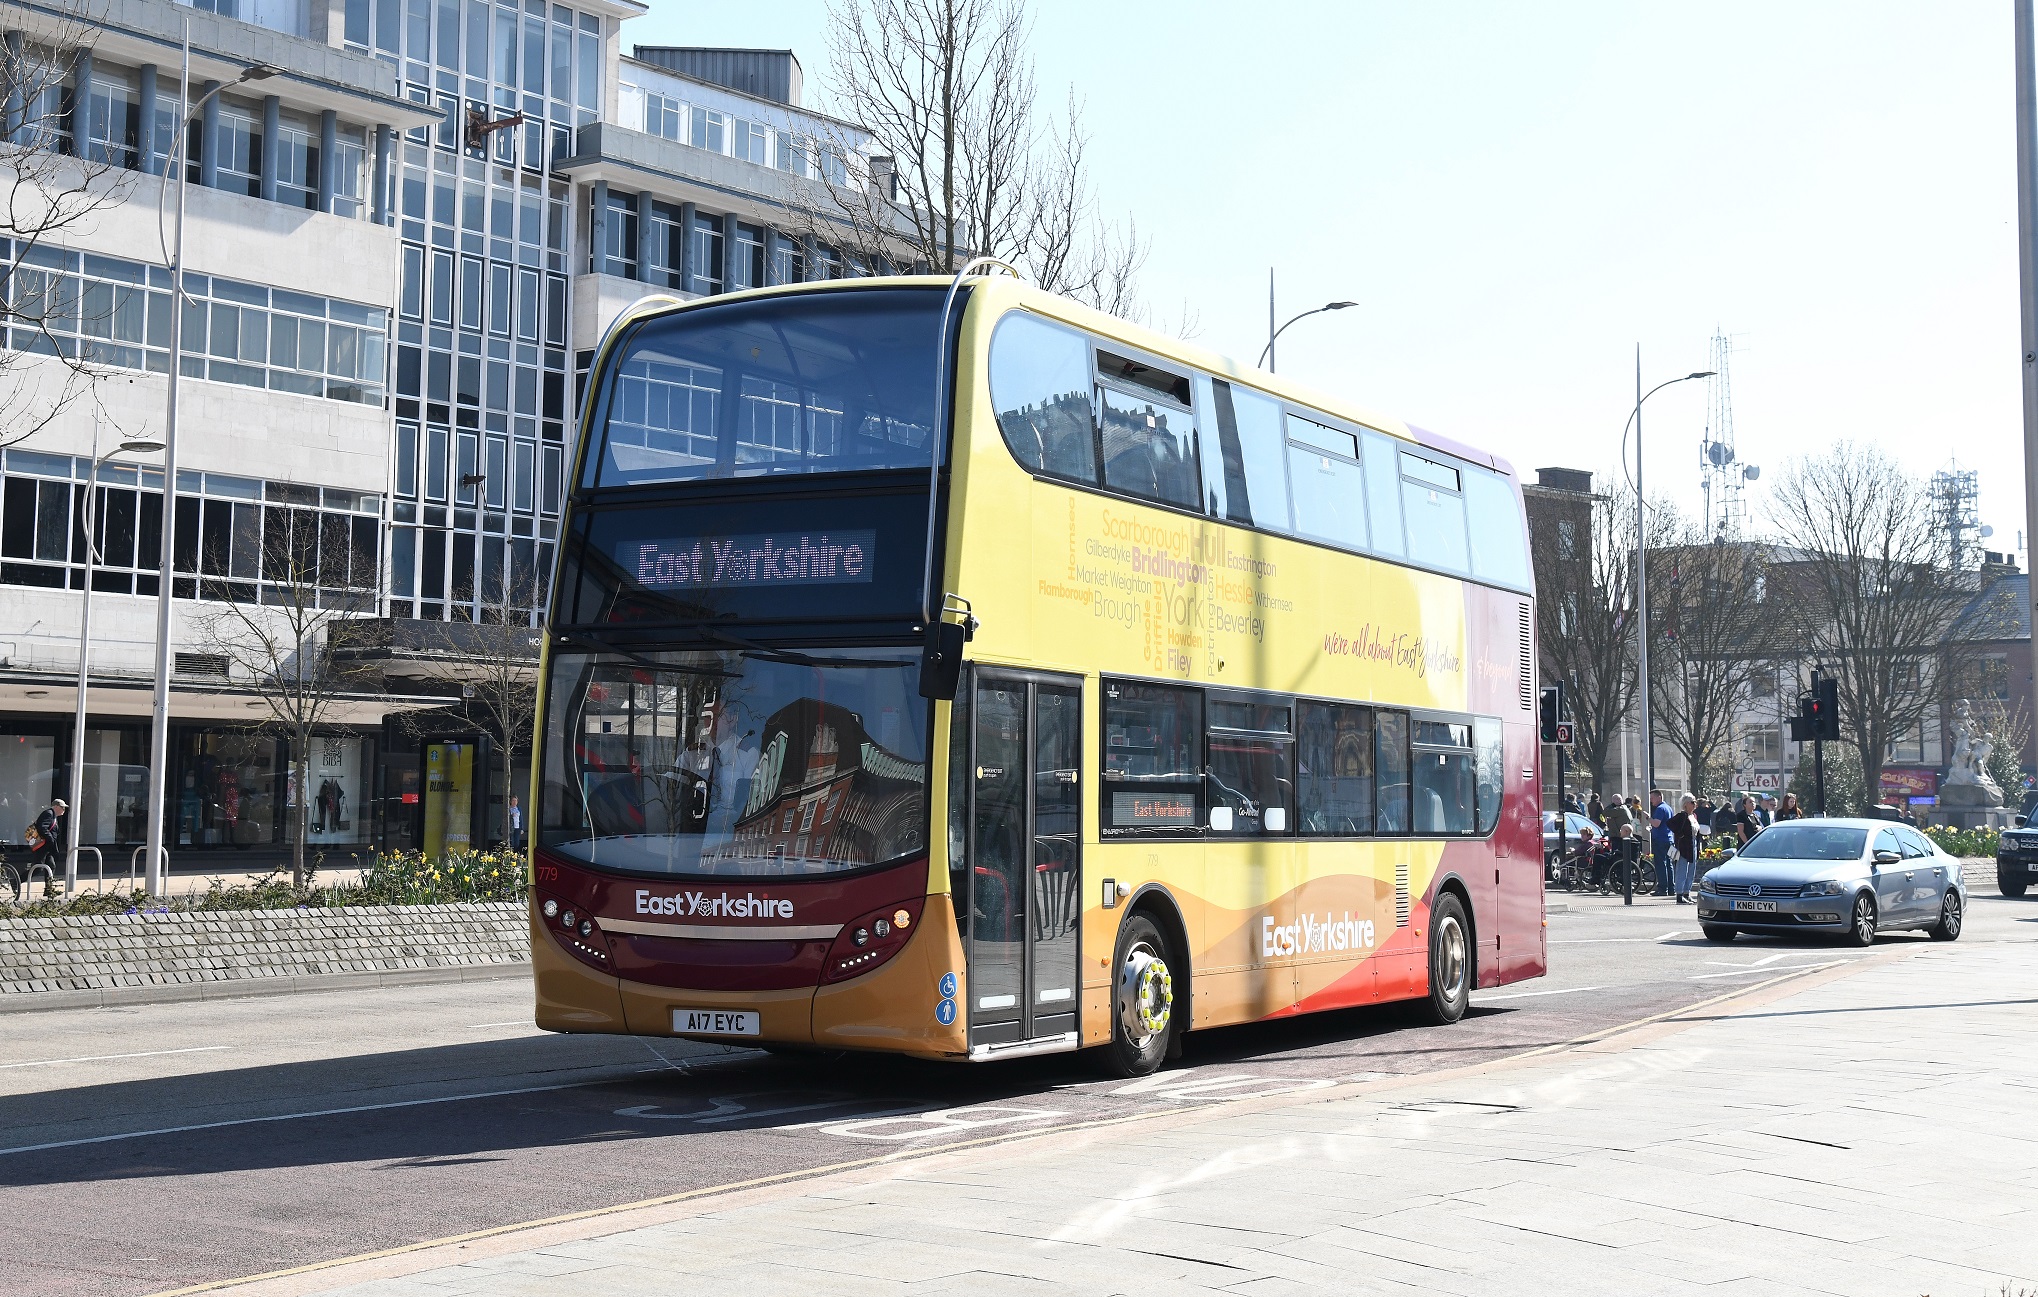 A red and yellow double decker bus driving down a city road.